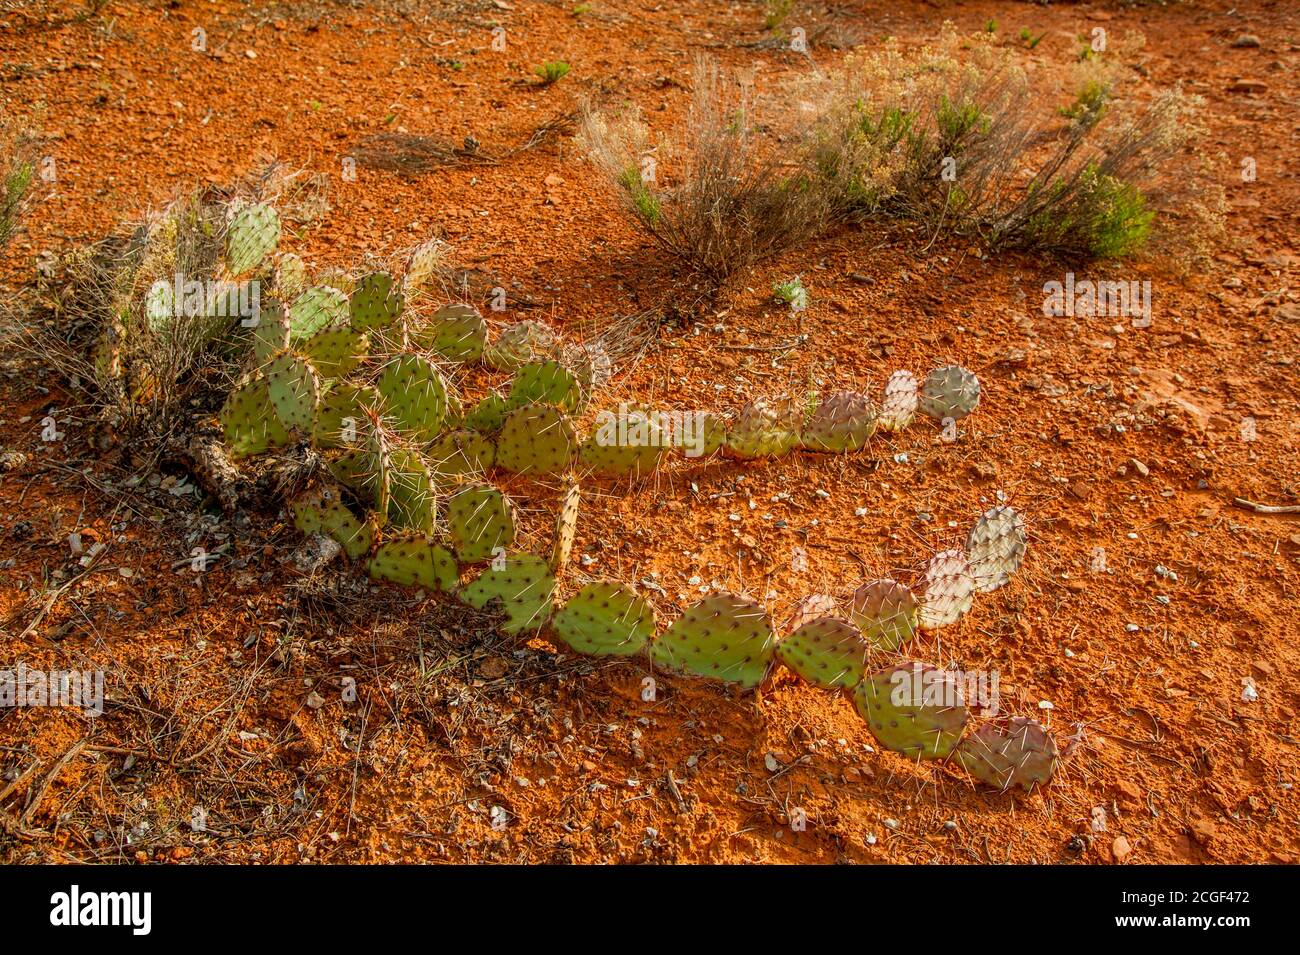 A prickly pear cactus creeping over the ground after tipping over near Sedona, Arizona, USA. Stock Photo